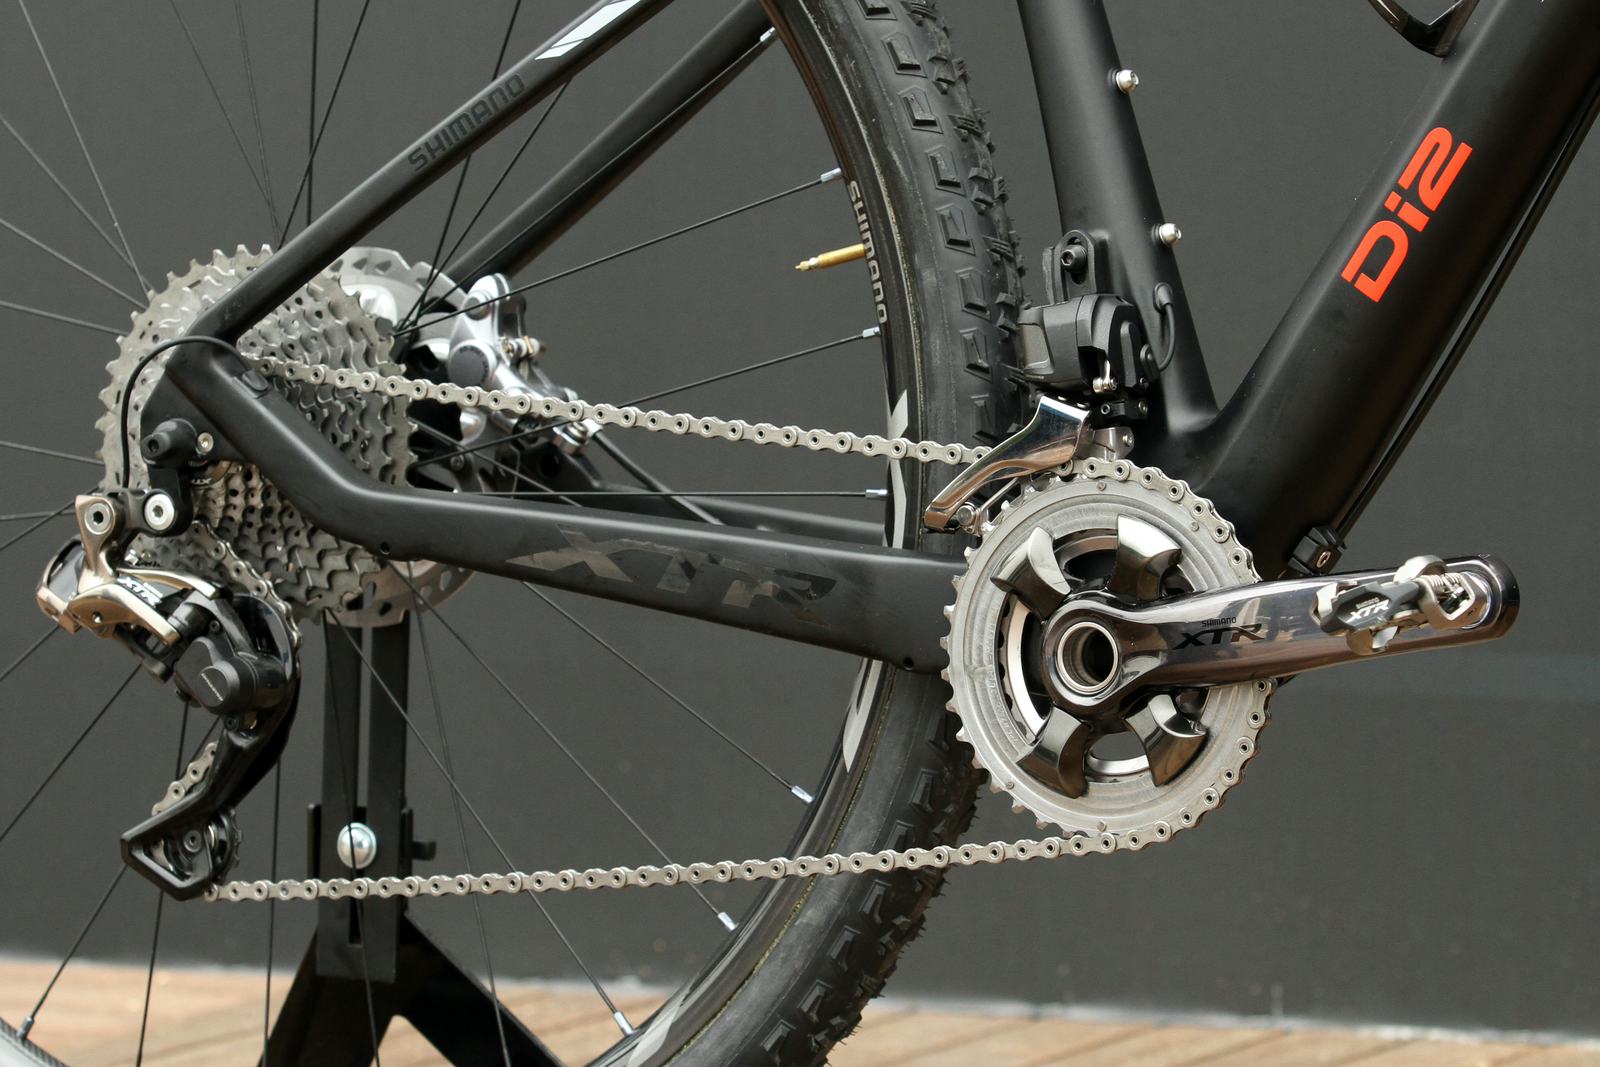 Shimano XTR Di2 is based on the new mechanical XTR M9000, introduced earlier in the season. - Photo Grega Stopar